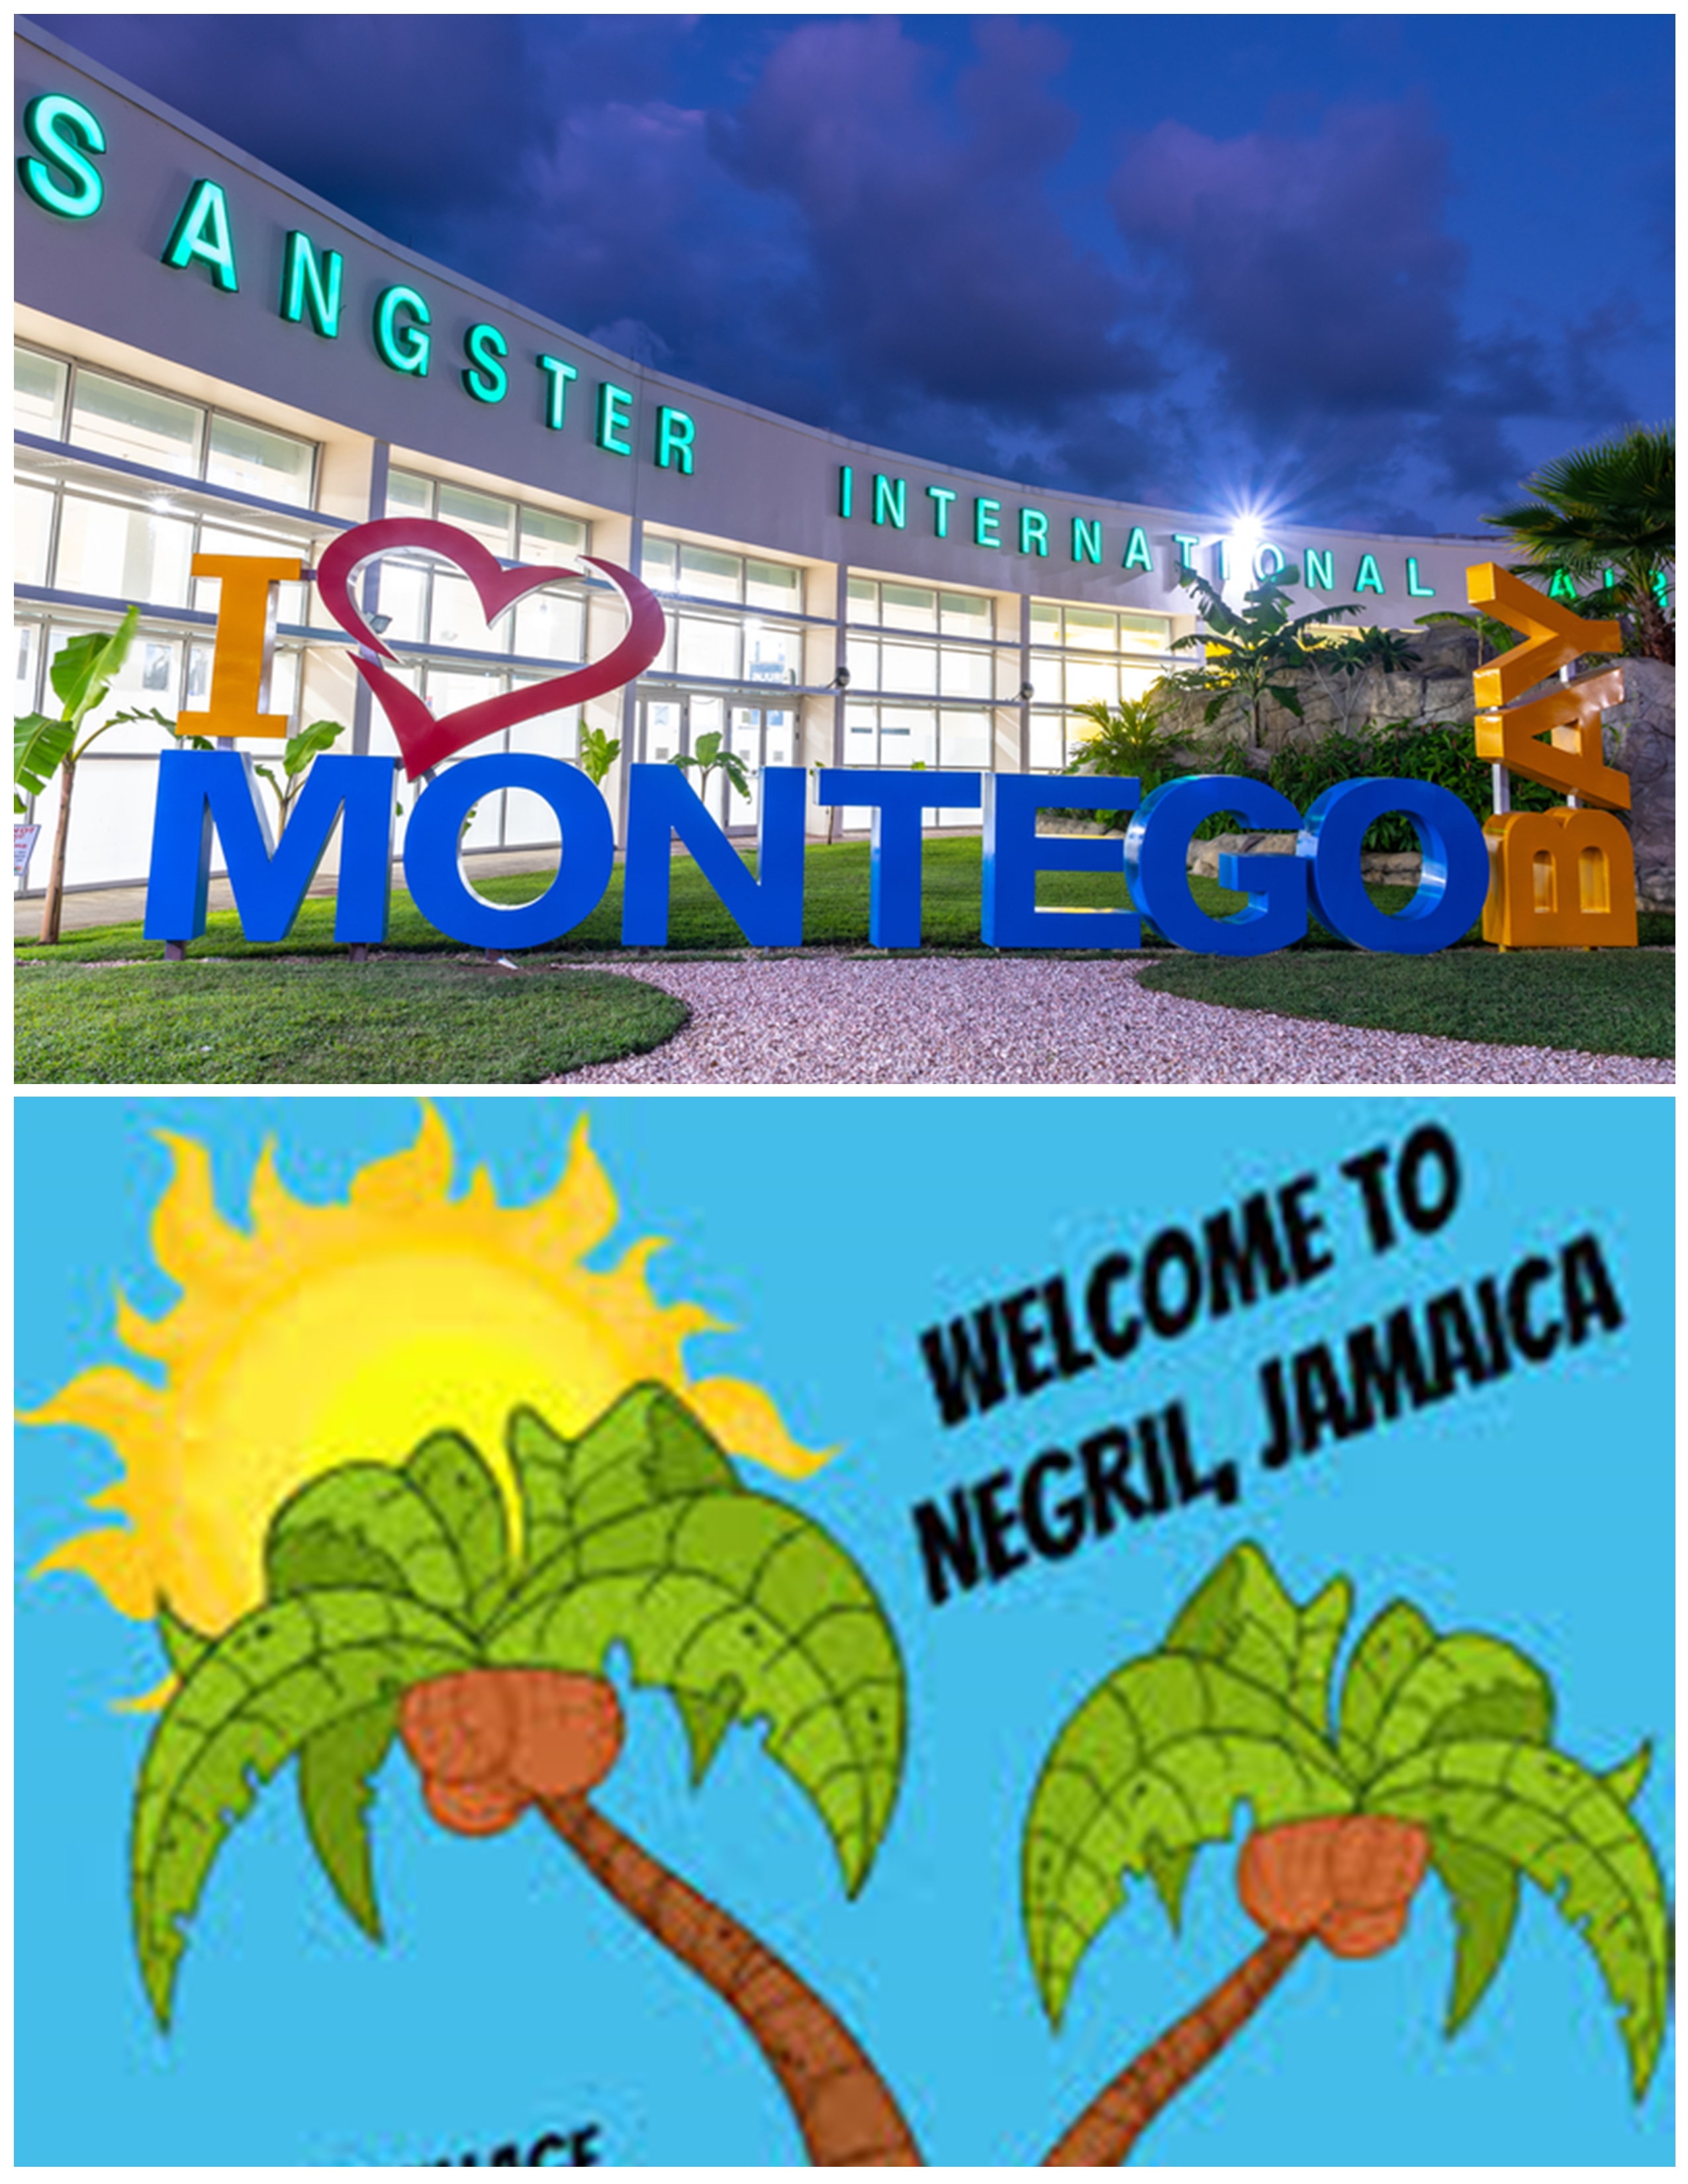 Donald Sangster's International ( Montego bay ) - Negril Town